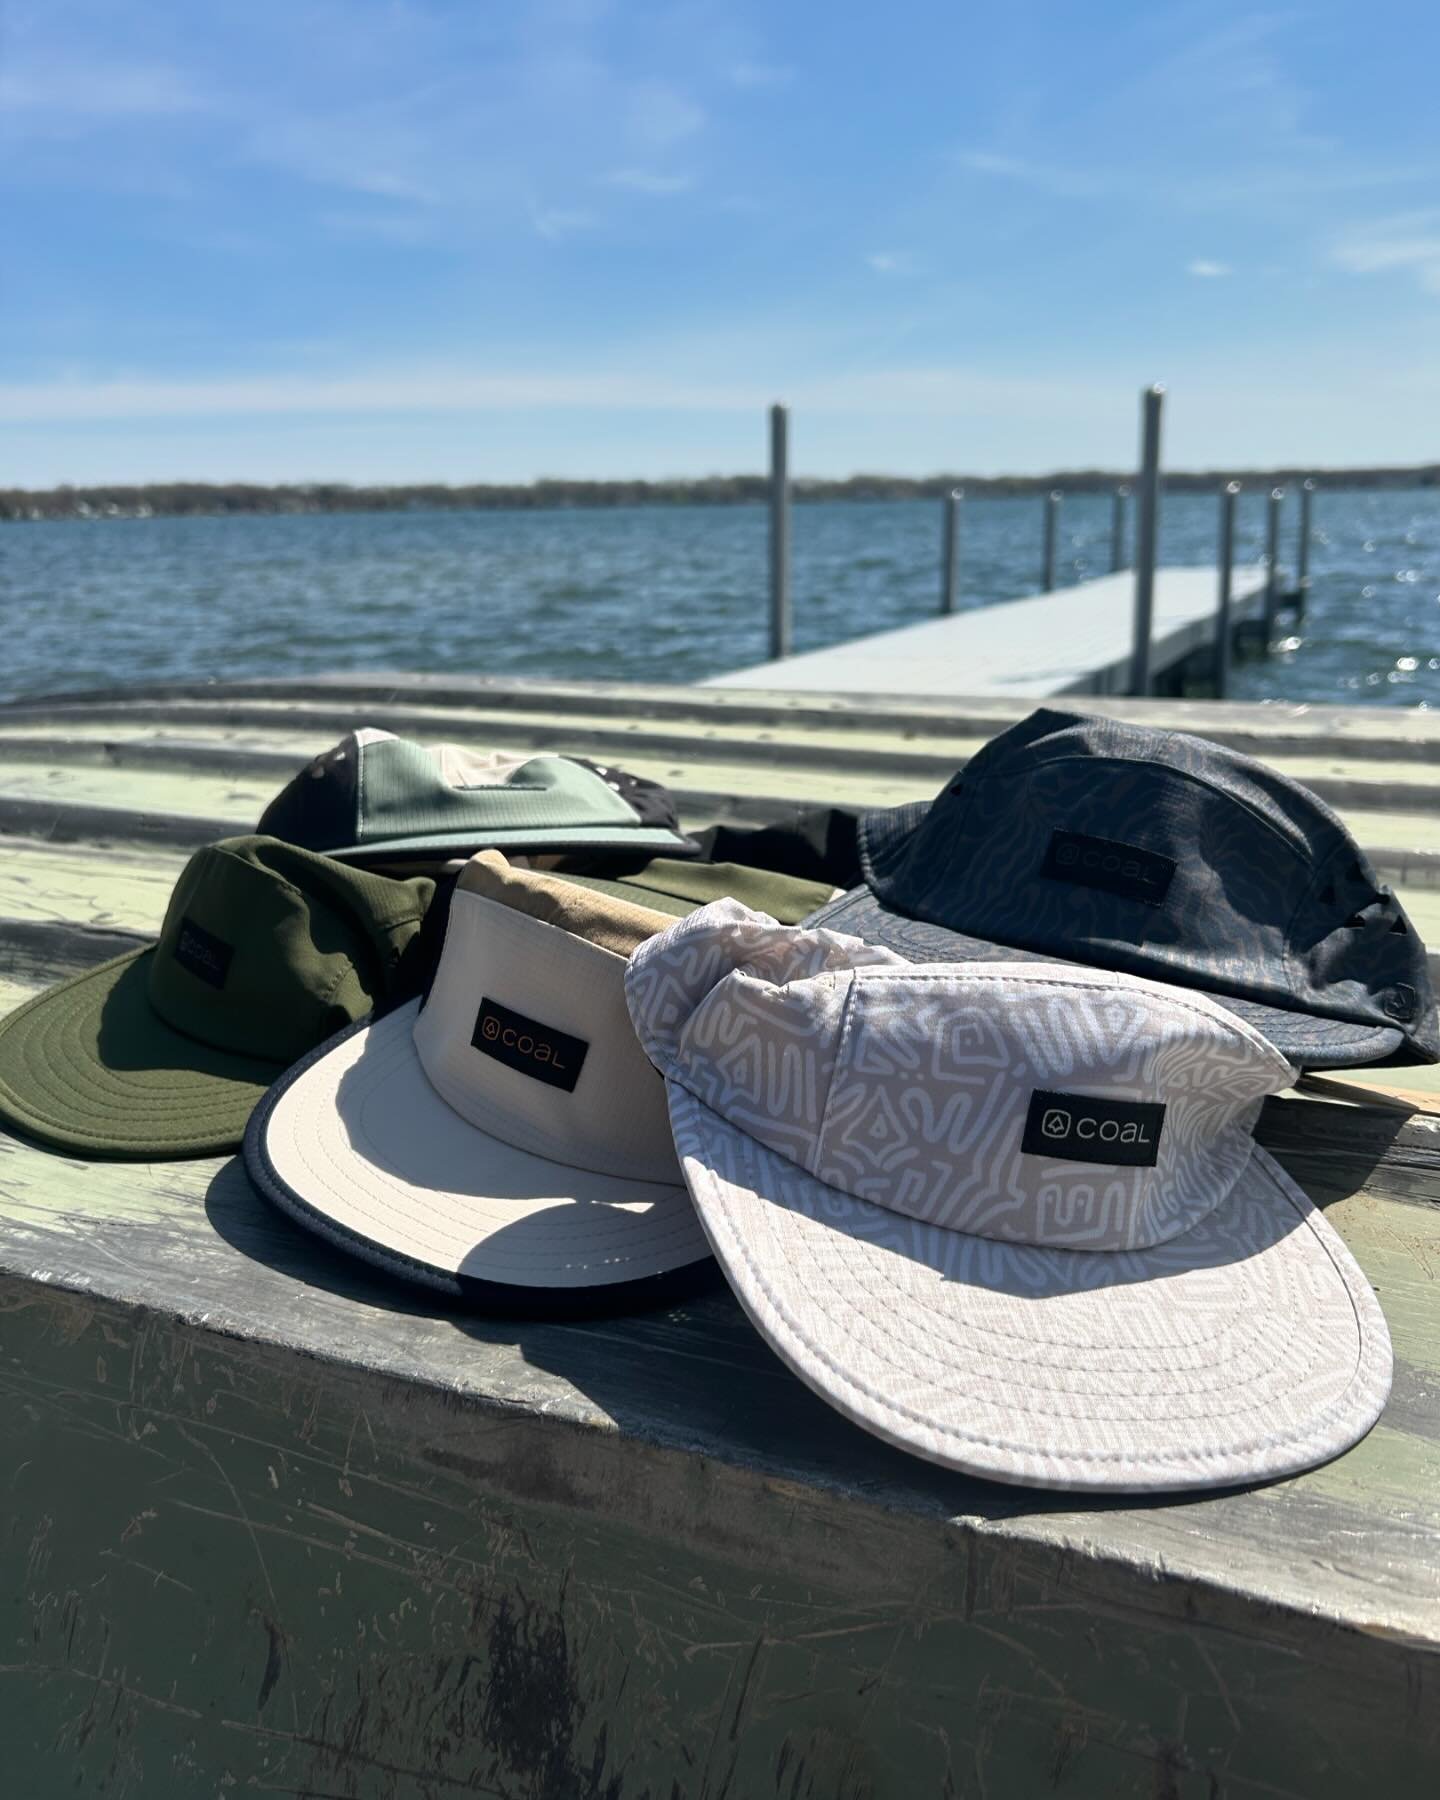 New @coalheadwear just hit the shelves!! Treat your noggin to The Provo! Made with UPF 50+ rated polyester for sun protection, super lightweight/breathable and a floatable brim makes this hat perfect for summer!